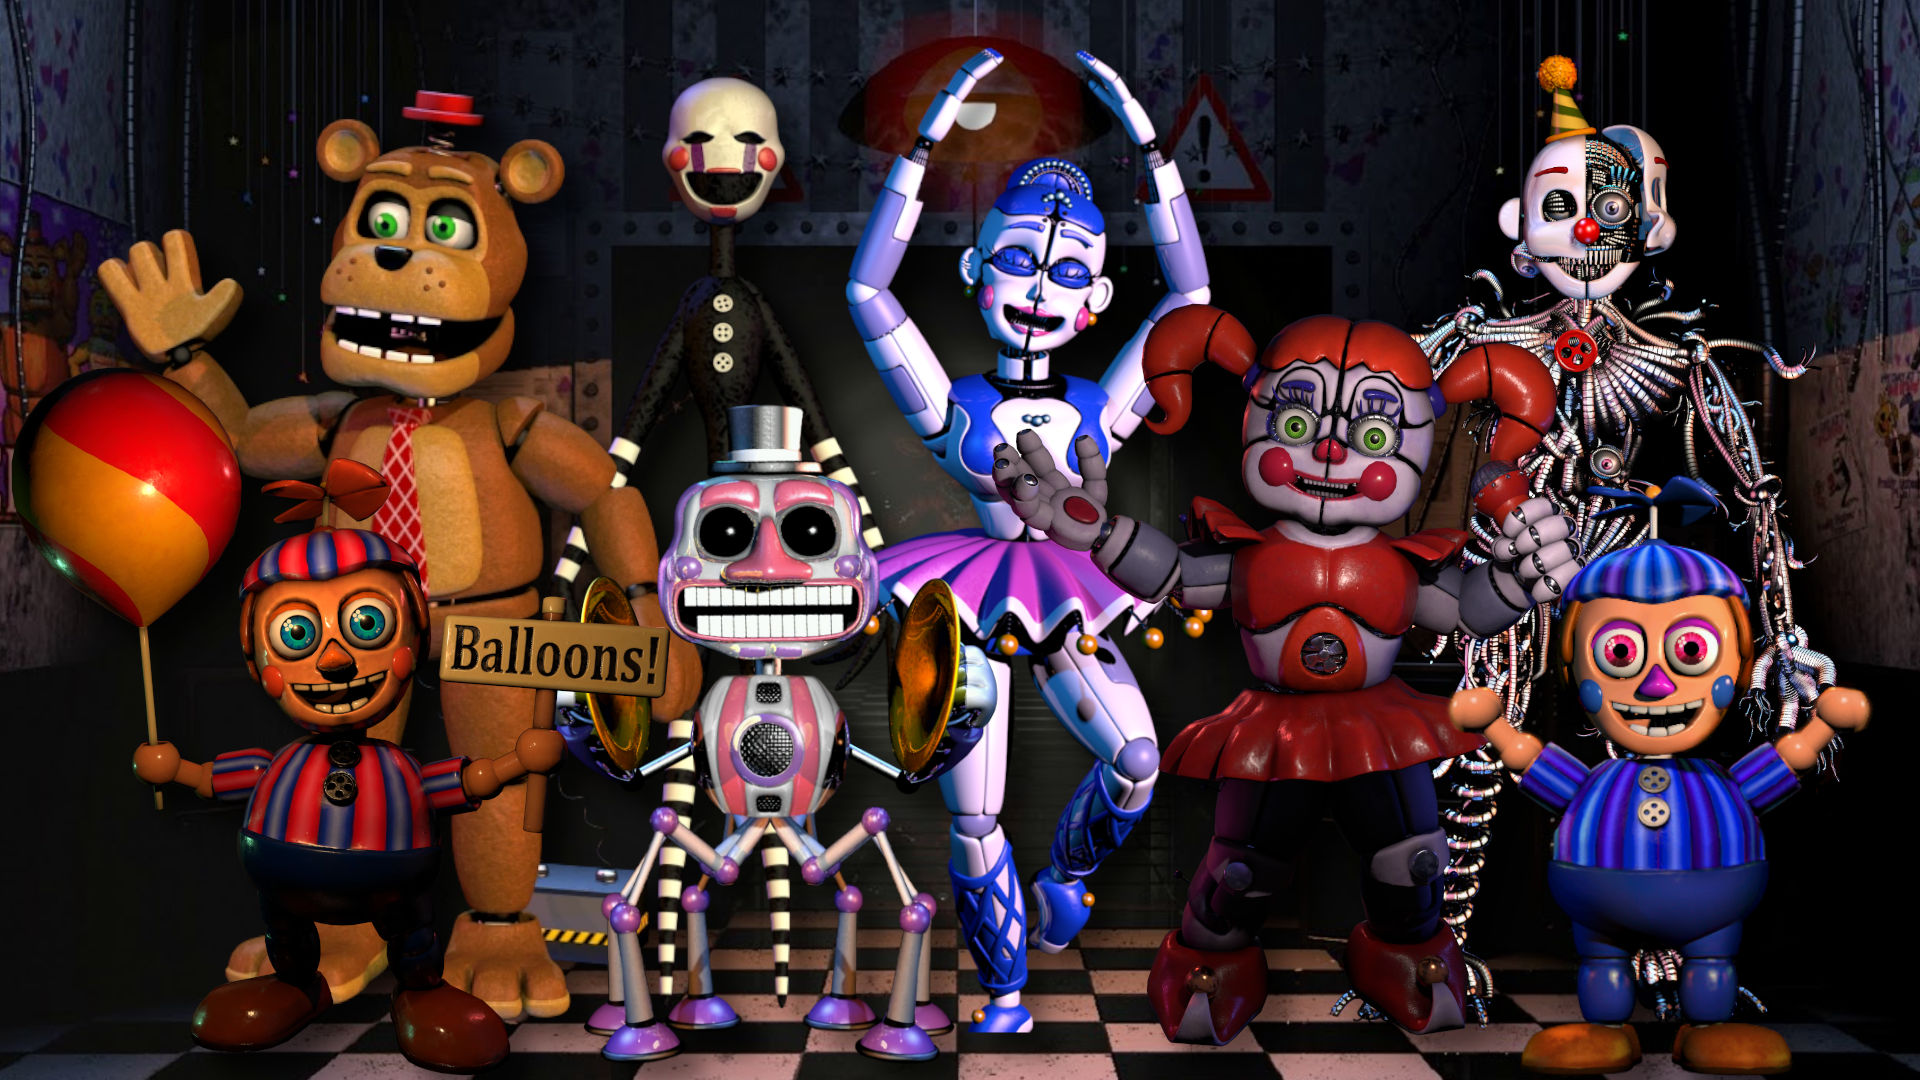 Fnaf and its characters